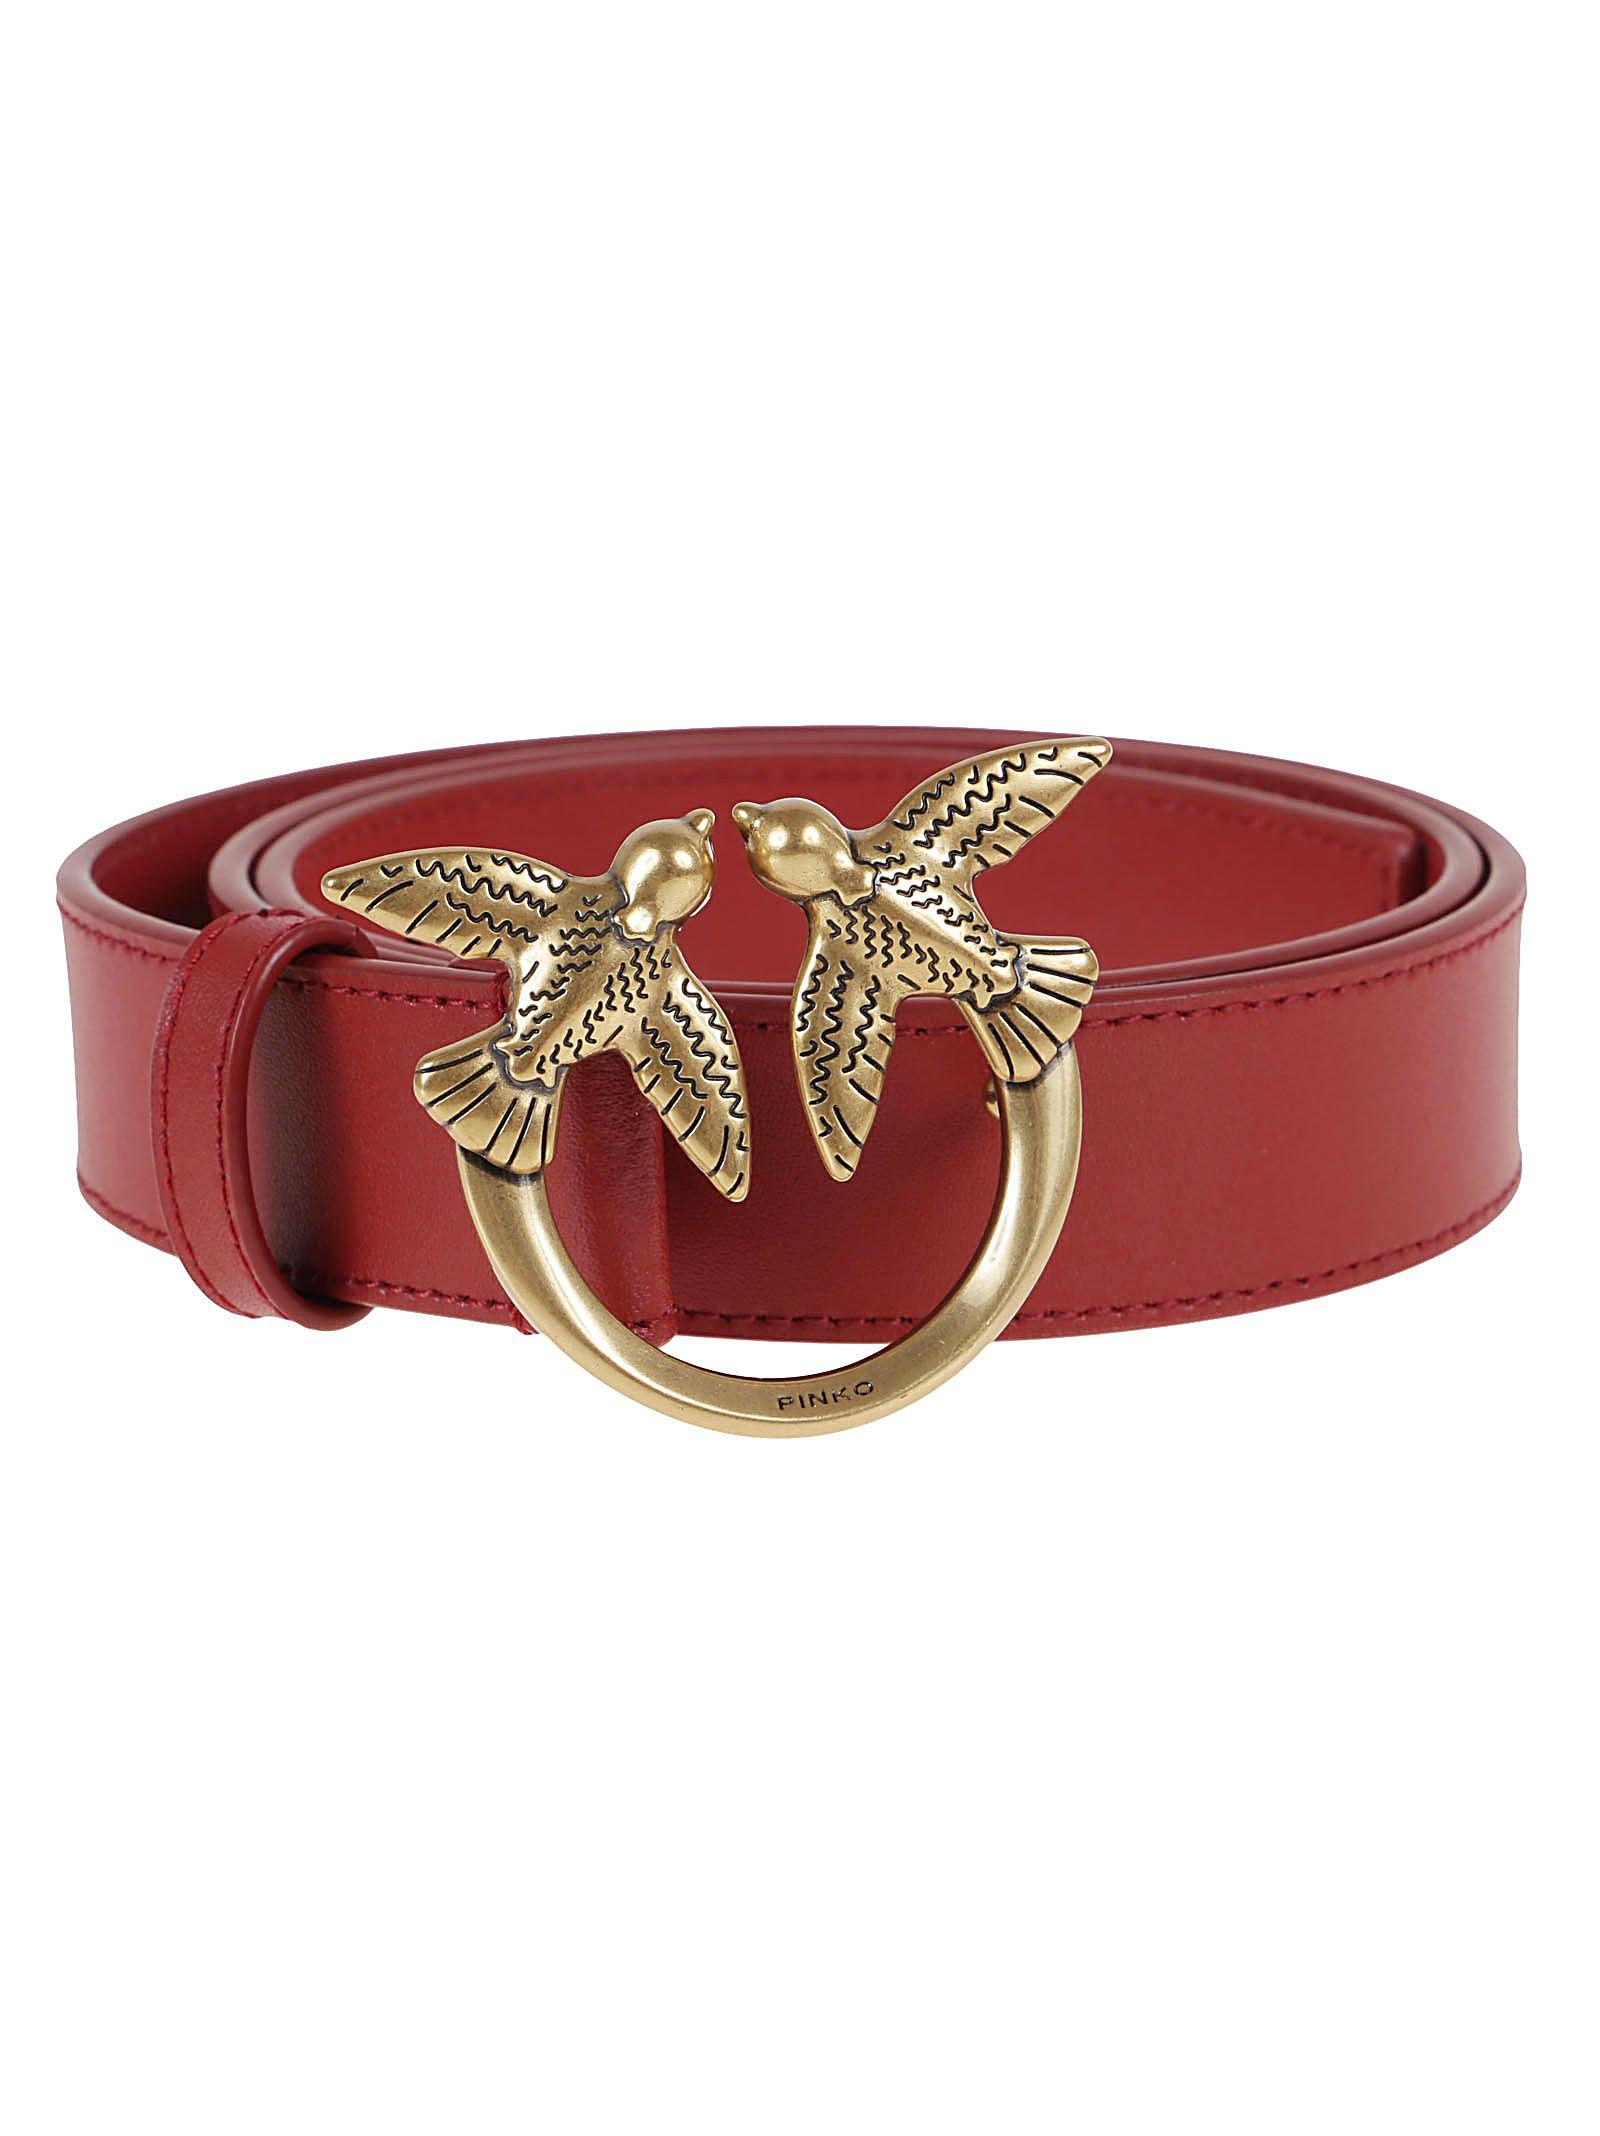 Pinko Leather Love Berry Simply H3 Belt in q Ruby Red (Red) - Save 15% |  Lyst